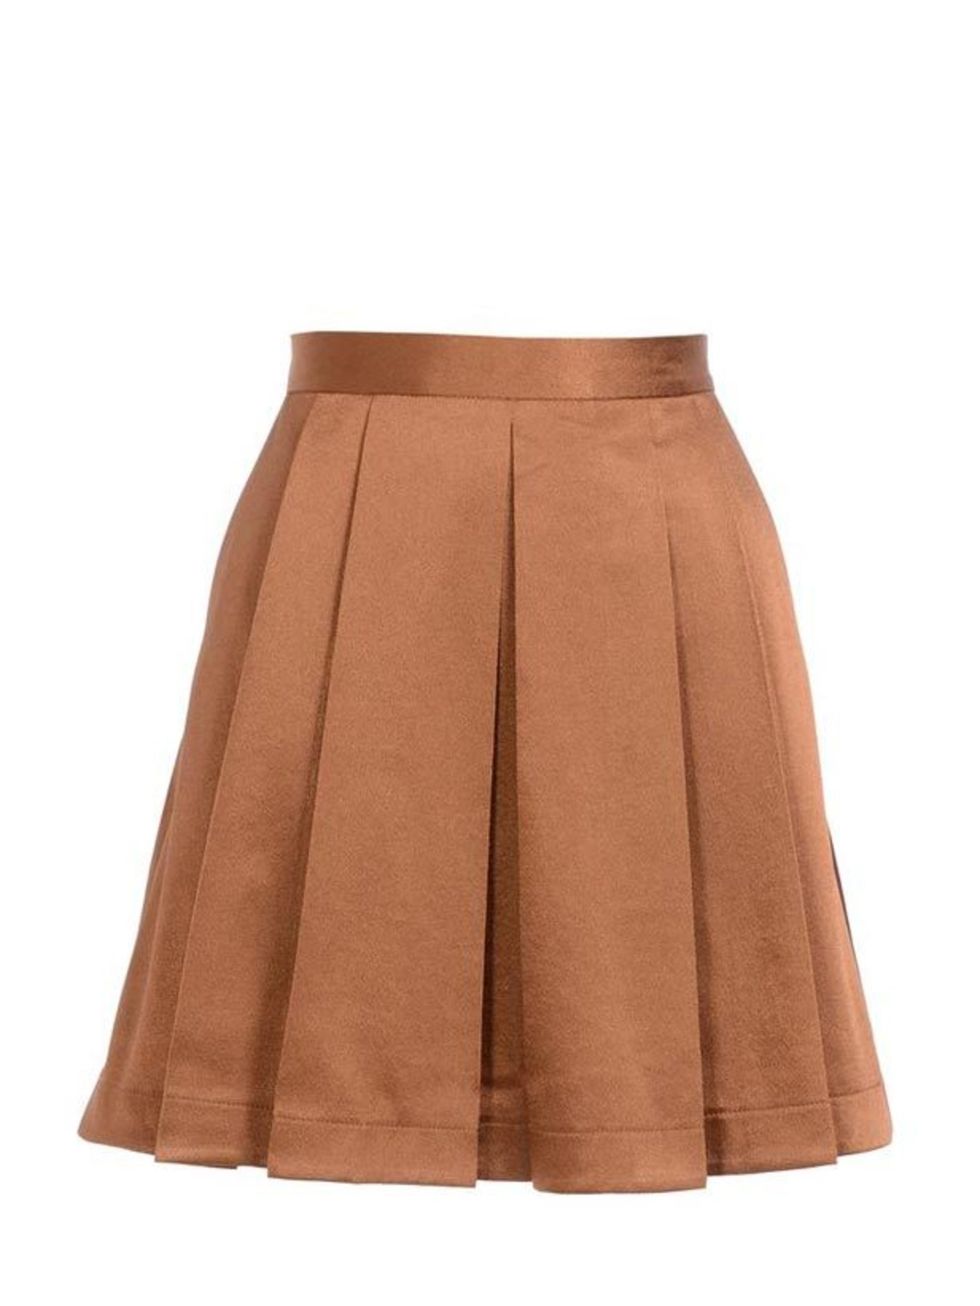 <p>Taking you from office to party, this luxe pleated skirt is a timeless staple Club Monaco satin skirt, £170, at <a href="http://www.brownsfashion.com/Product/Pleated_satin_skirt/Product.aspx?p=3509279">Browns</a> </p>